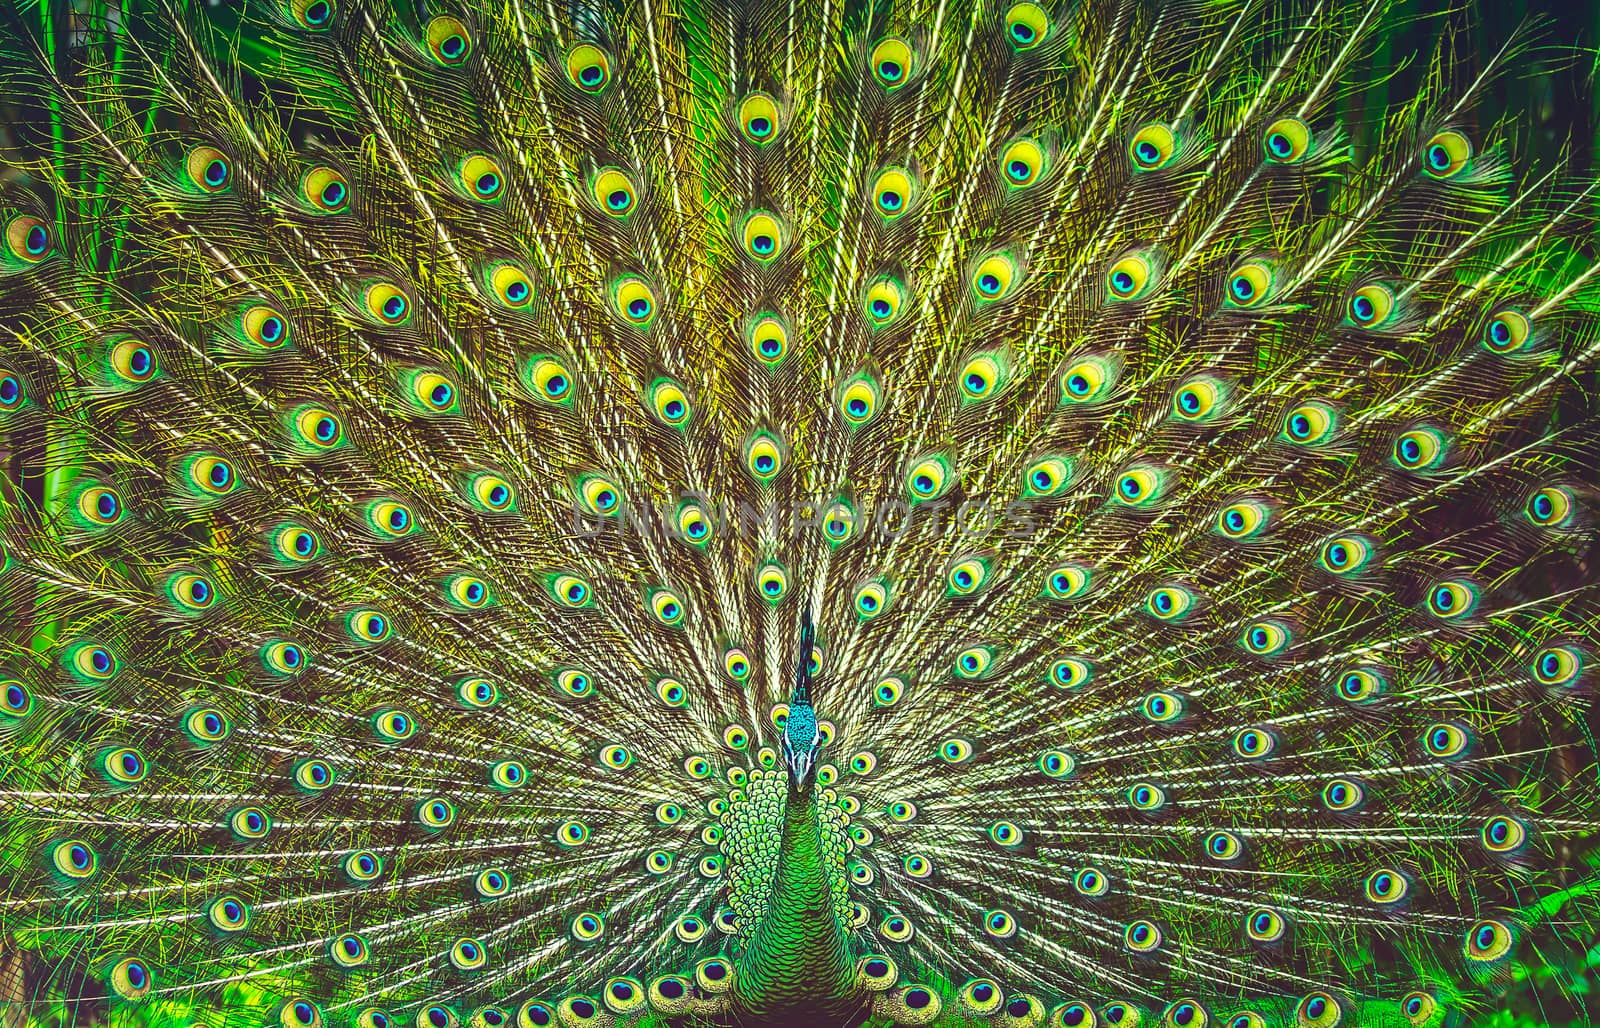 Amazing peacock tail by Anna_Omelchenko